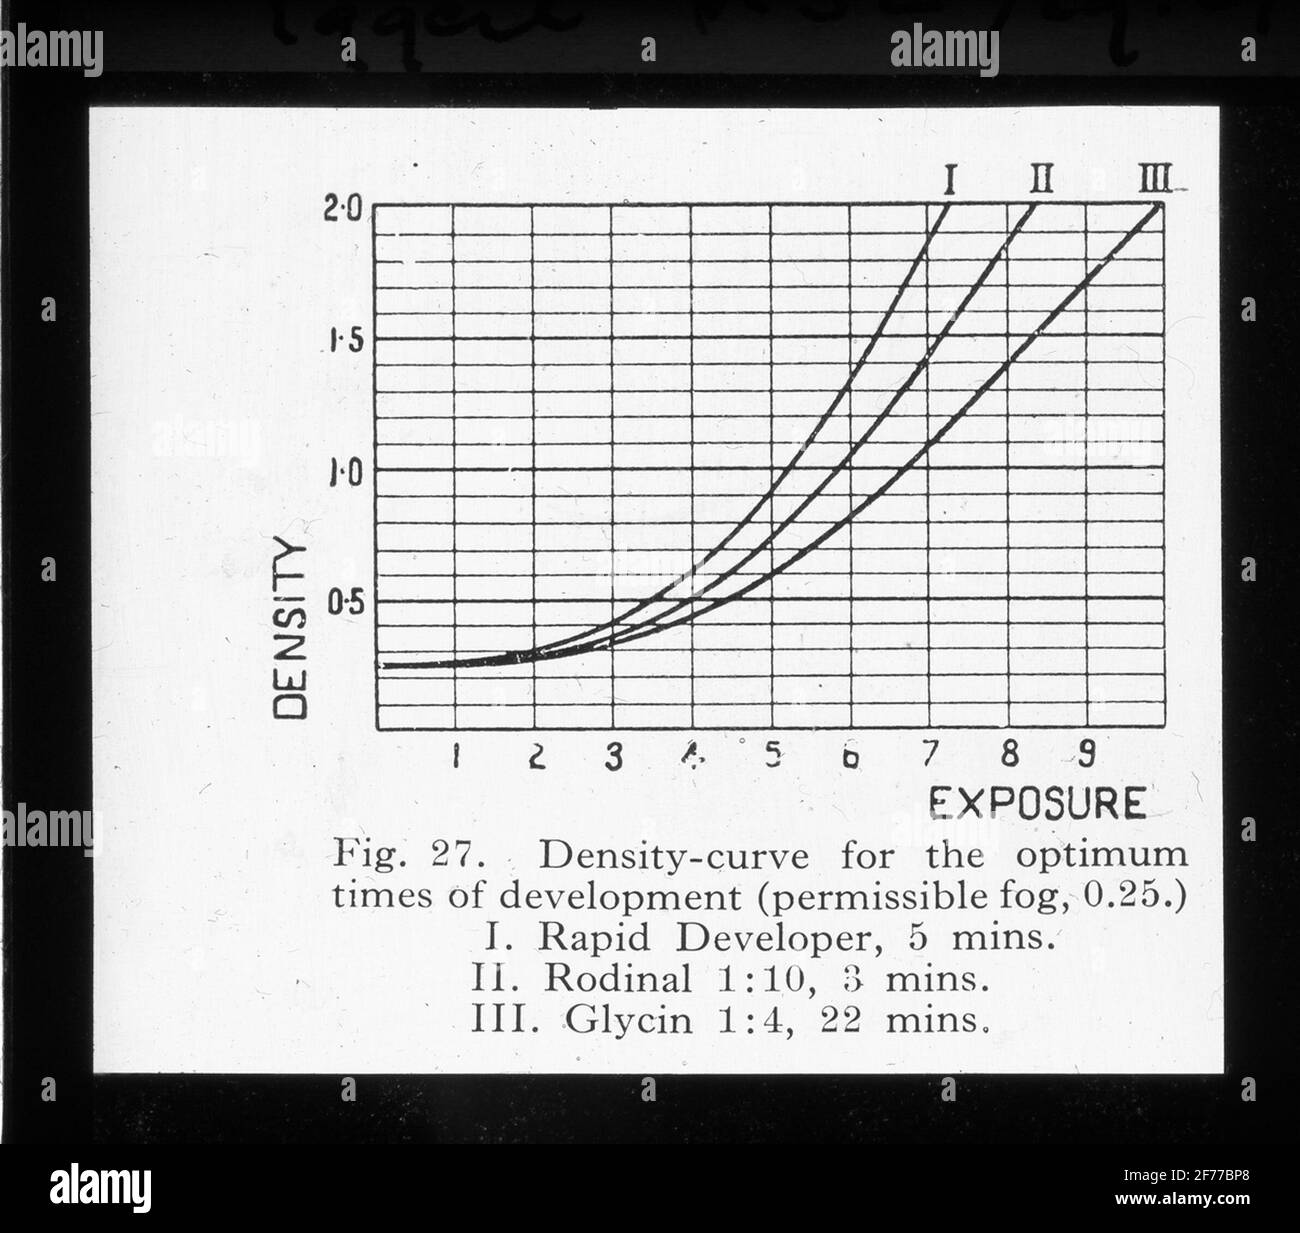 Skiopticon image from the Department of Photography at the Royal Institute of Technology. Use by Professor Helmer Bäckström as lecture material. Bäckström was Sweden's first professor in photography at the Royal Institute of Technology in Stockholm 1948-1958. Density curves for the optimal developing times for: Rapid, Rodinal and Glycine. Stock Photo